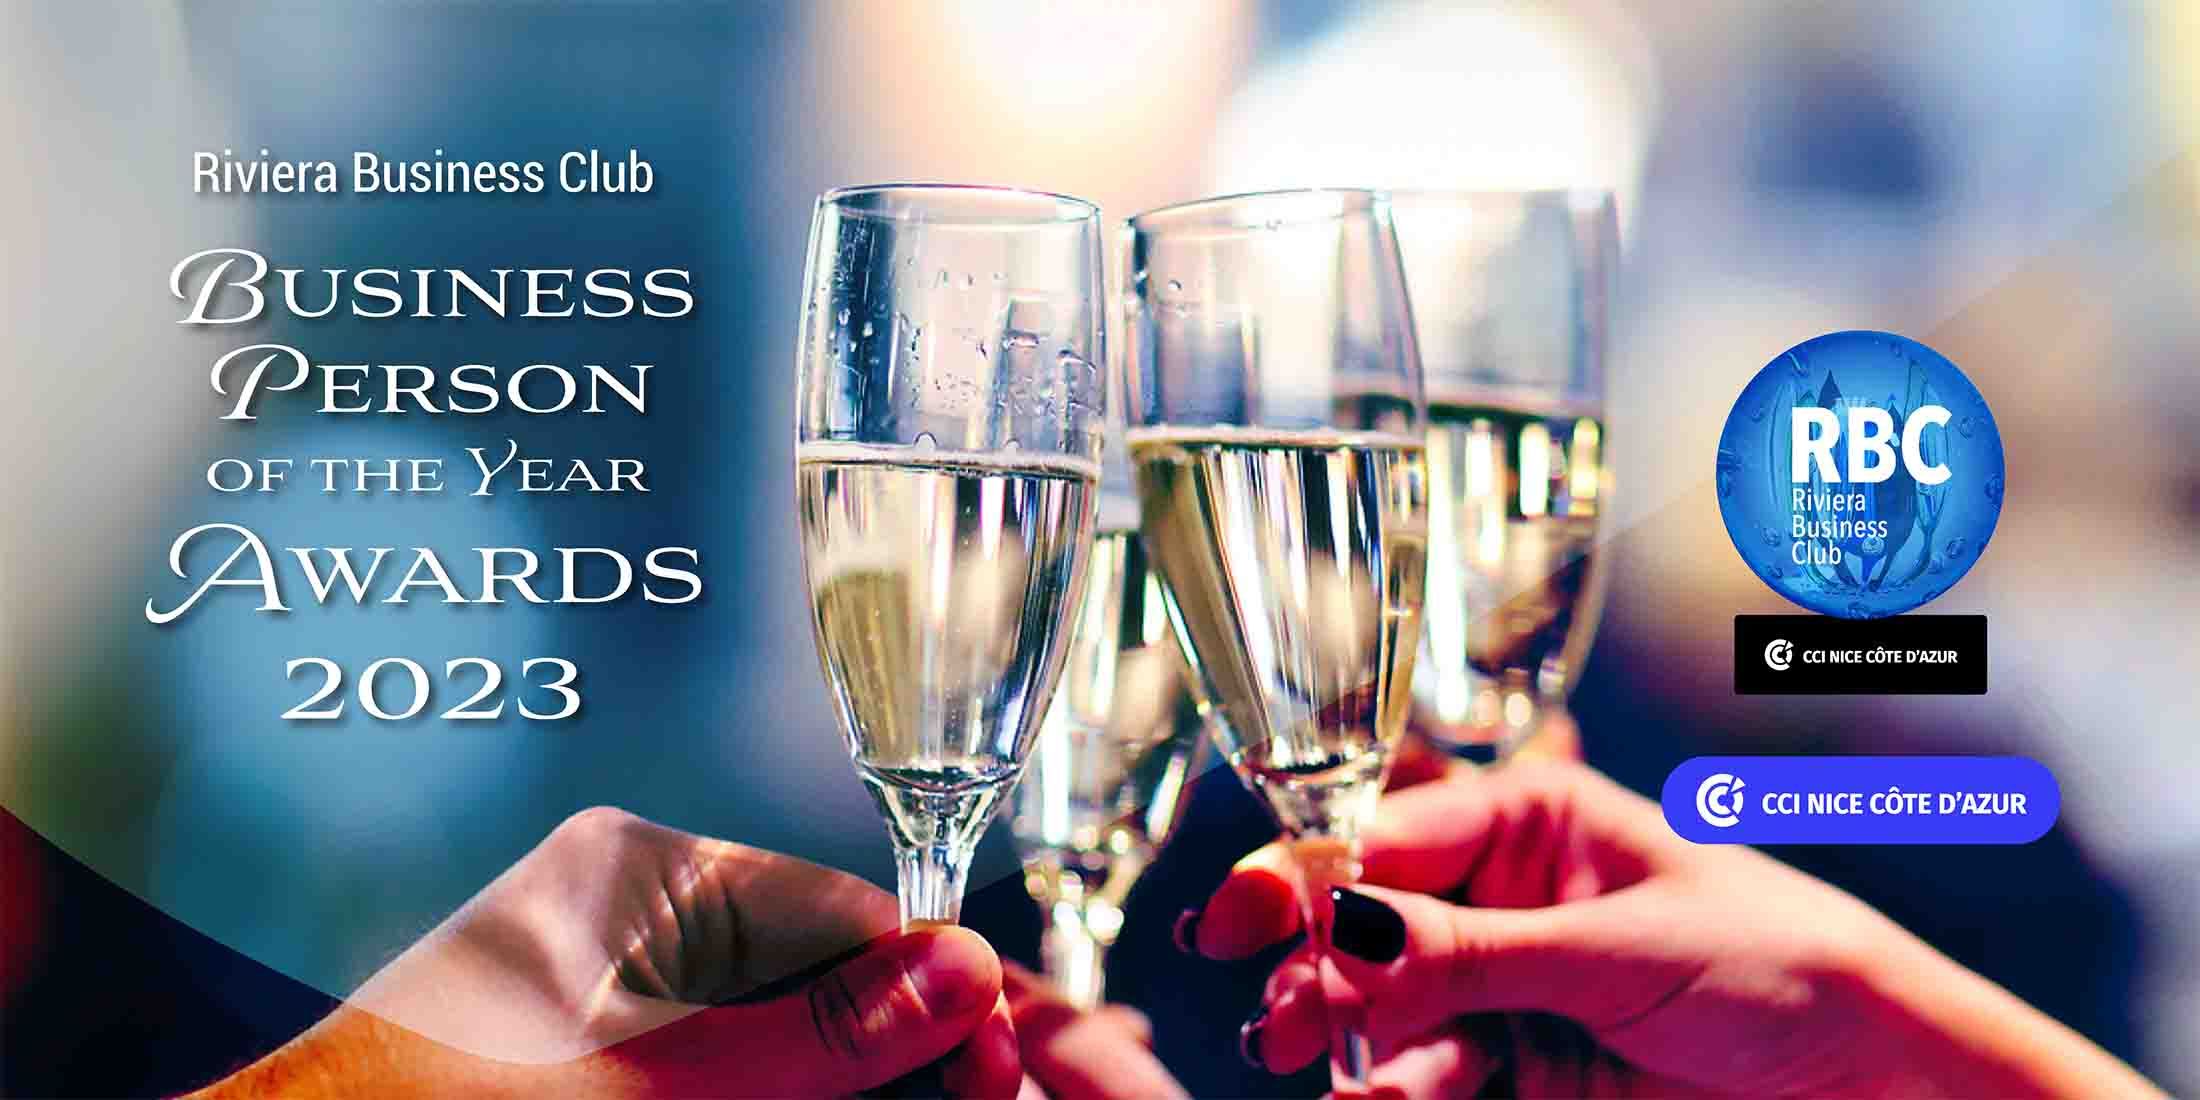 RBC Business Person of the Year Awards ceremony and gala dinner